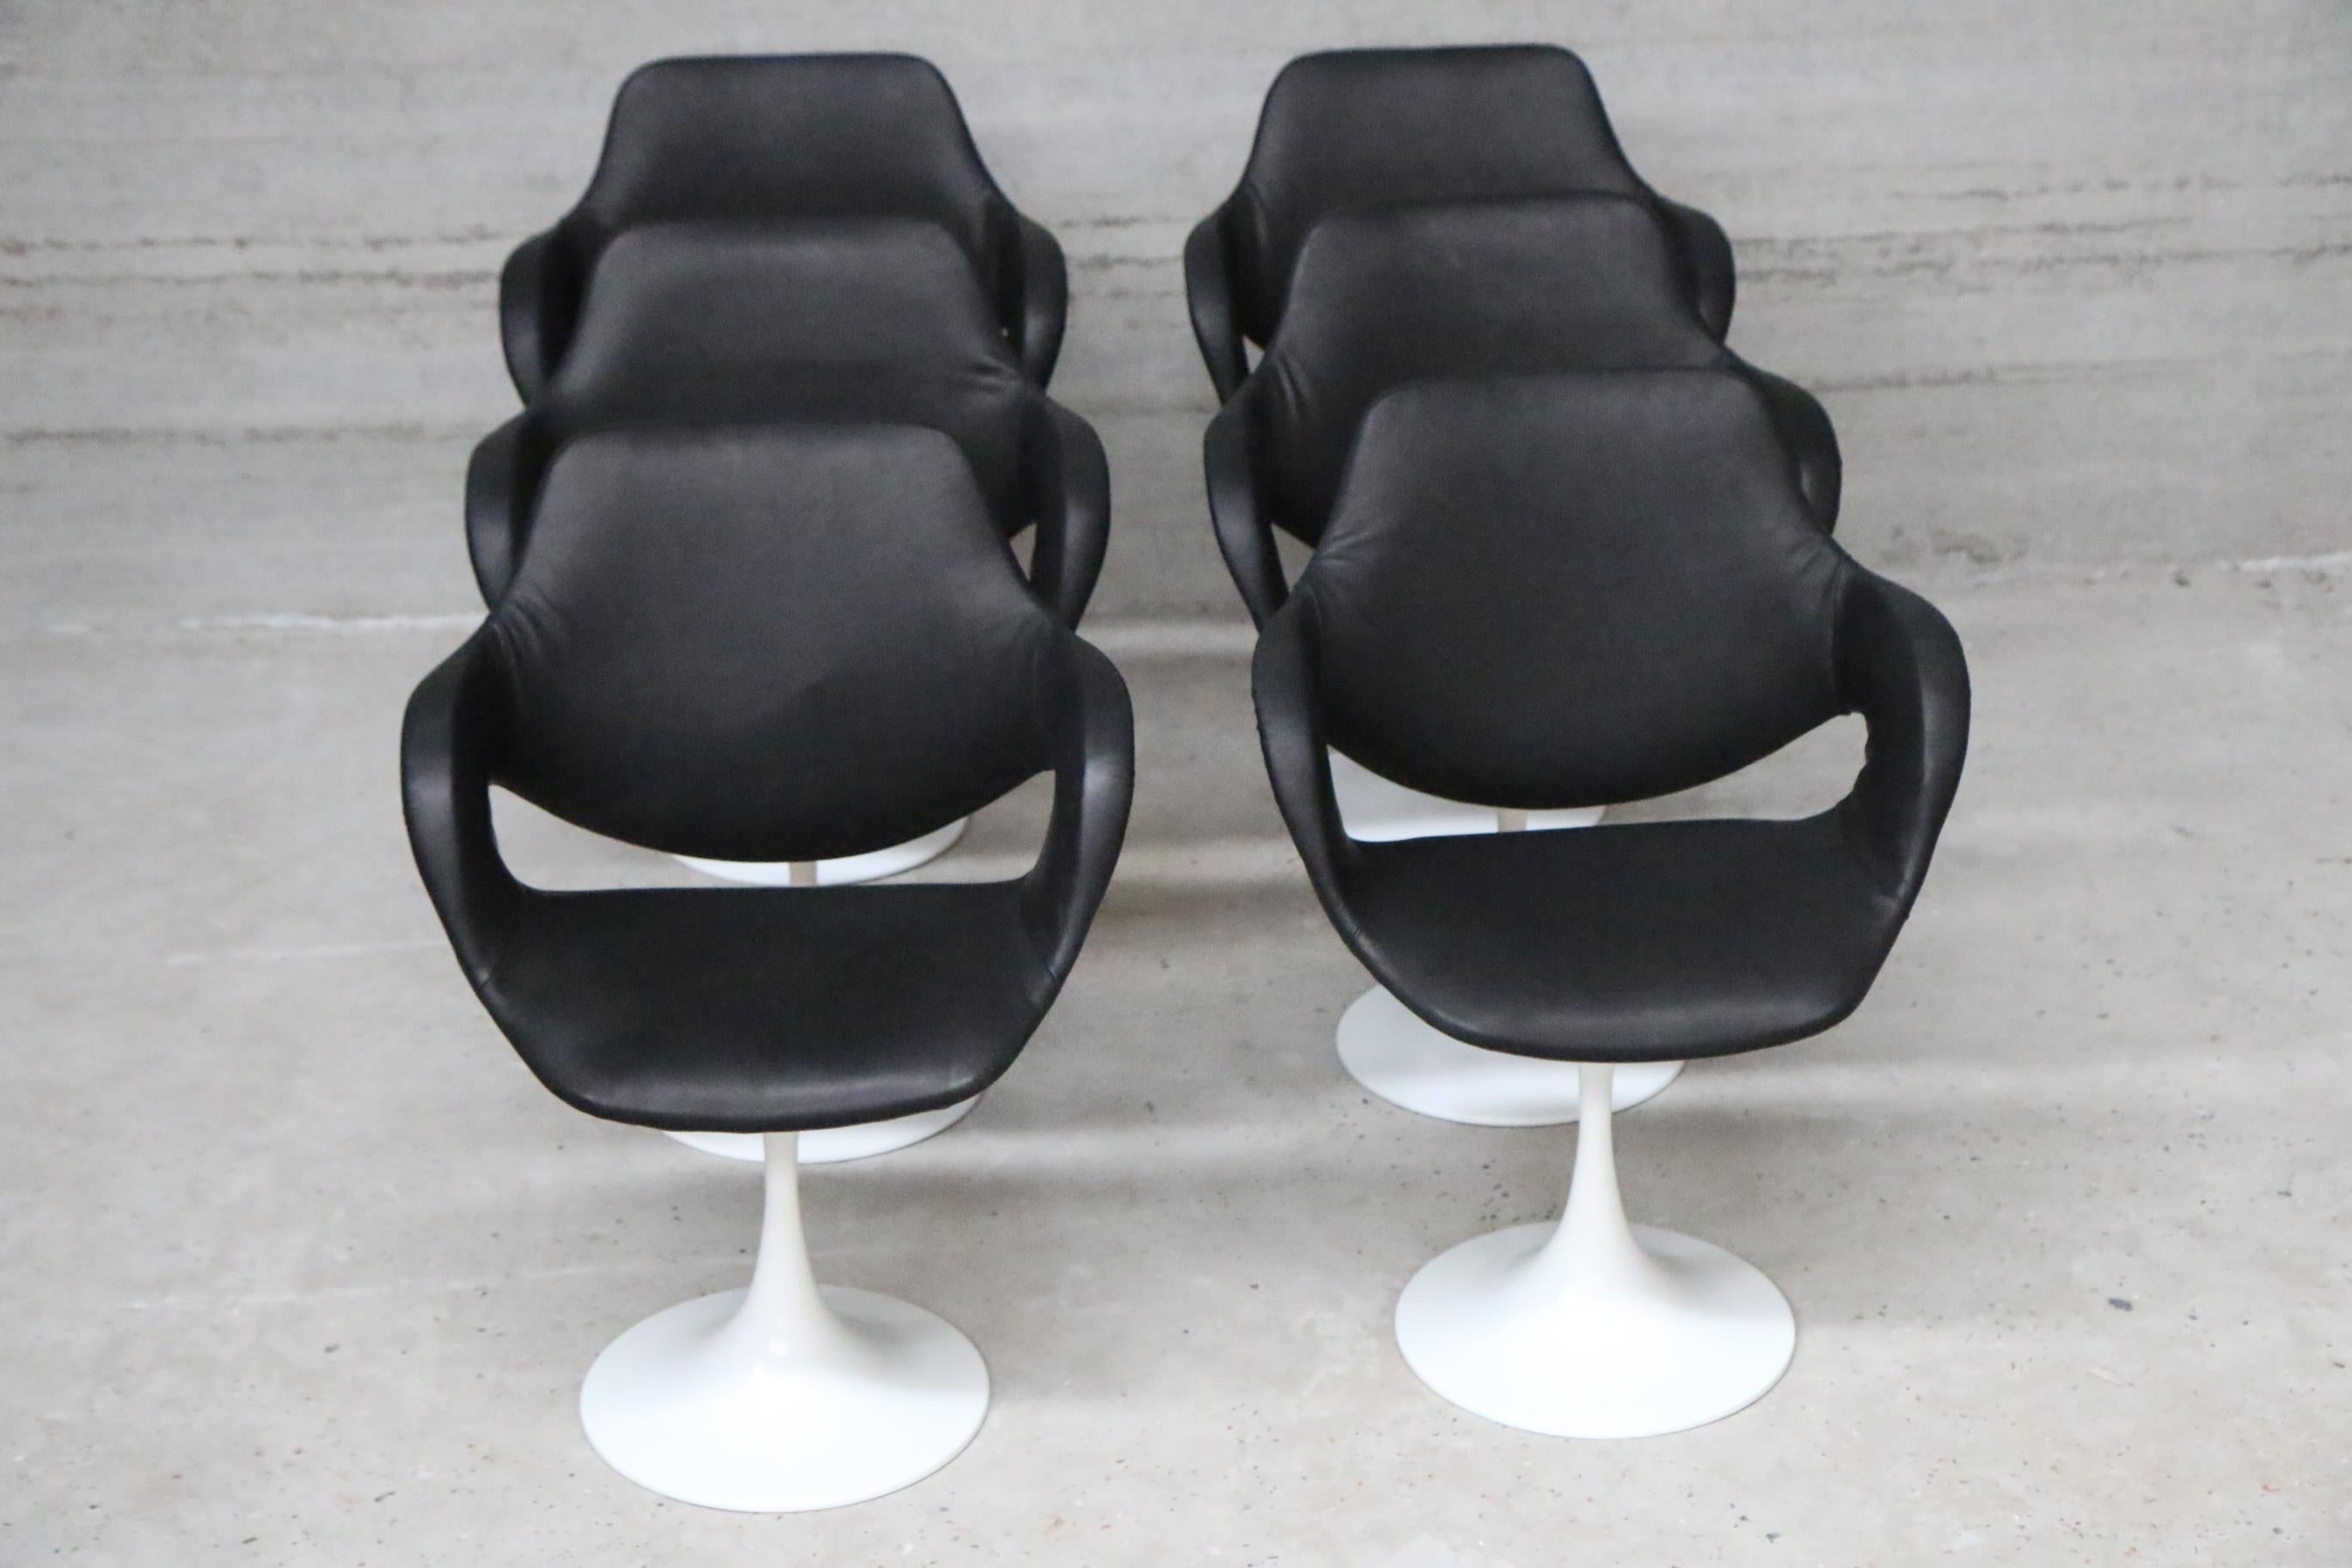 6 Boris Tabacoff Armchairs Re-Upholstered in Full Grain Black Leather For Sale 1